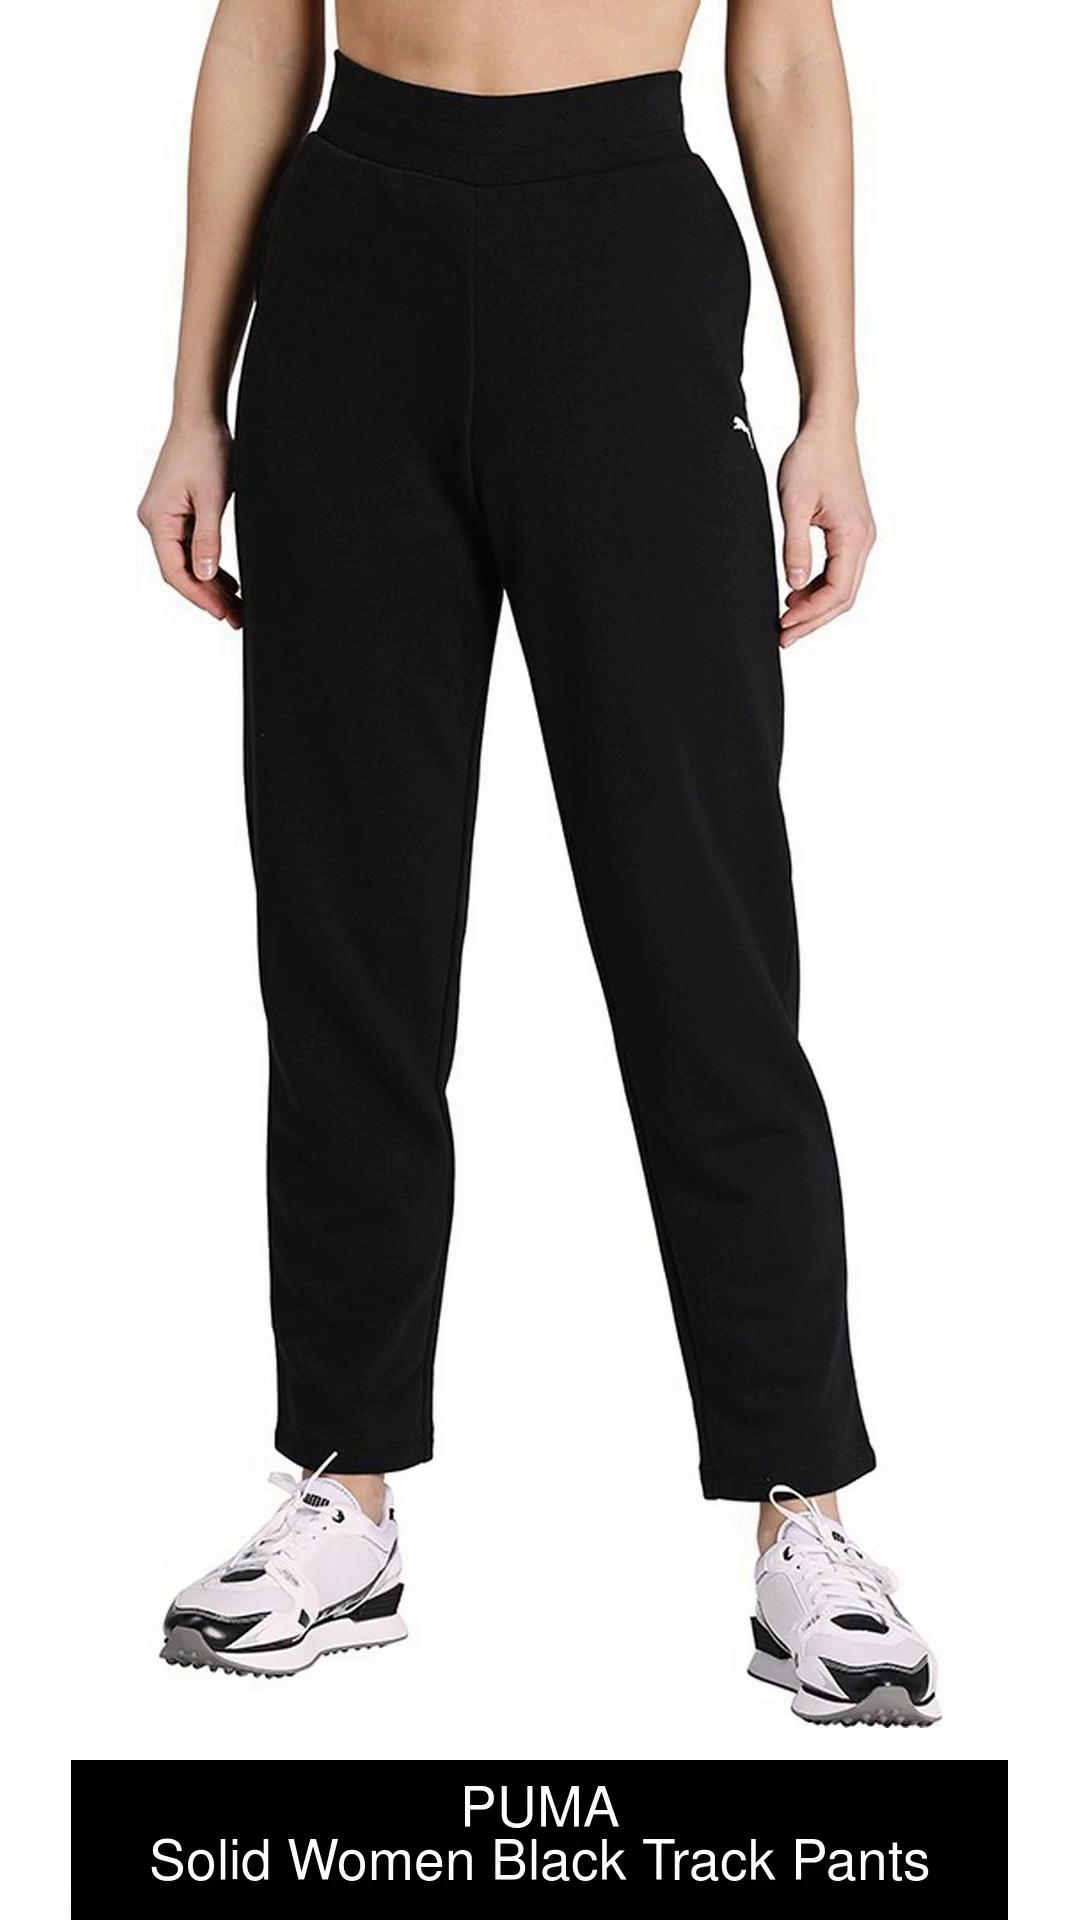 PUMA ESS Sweatpants Solid Women Black Track Pants - Buy PUMA ESS Sweatpants  Solid Women Black Track Pants Online at Best Prices in India